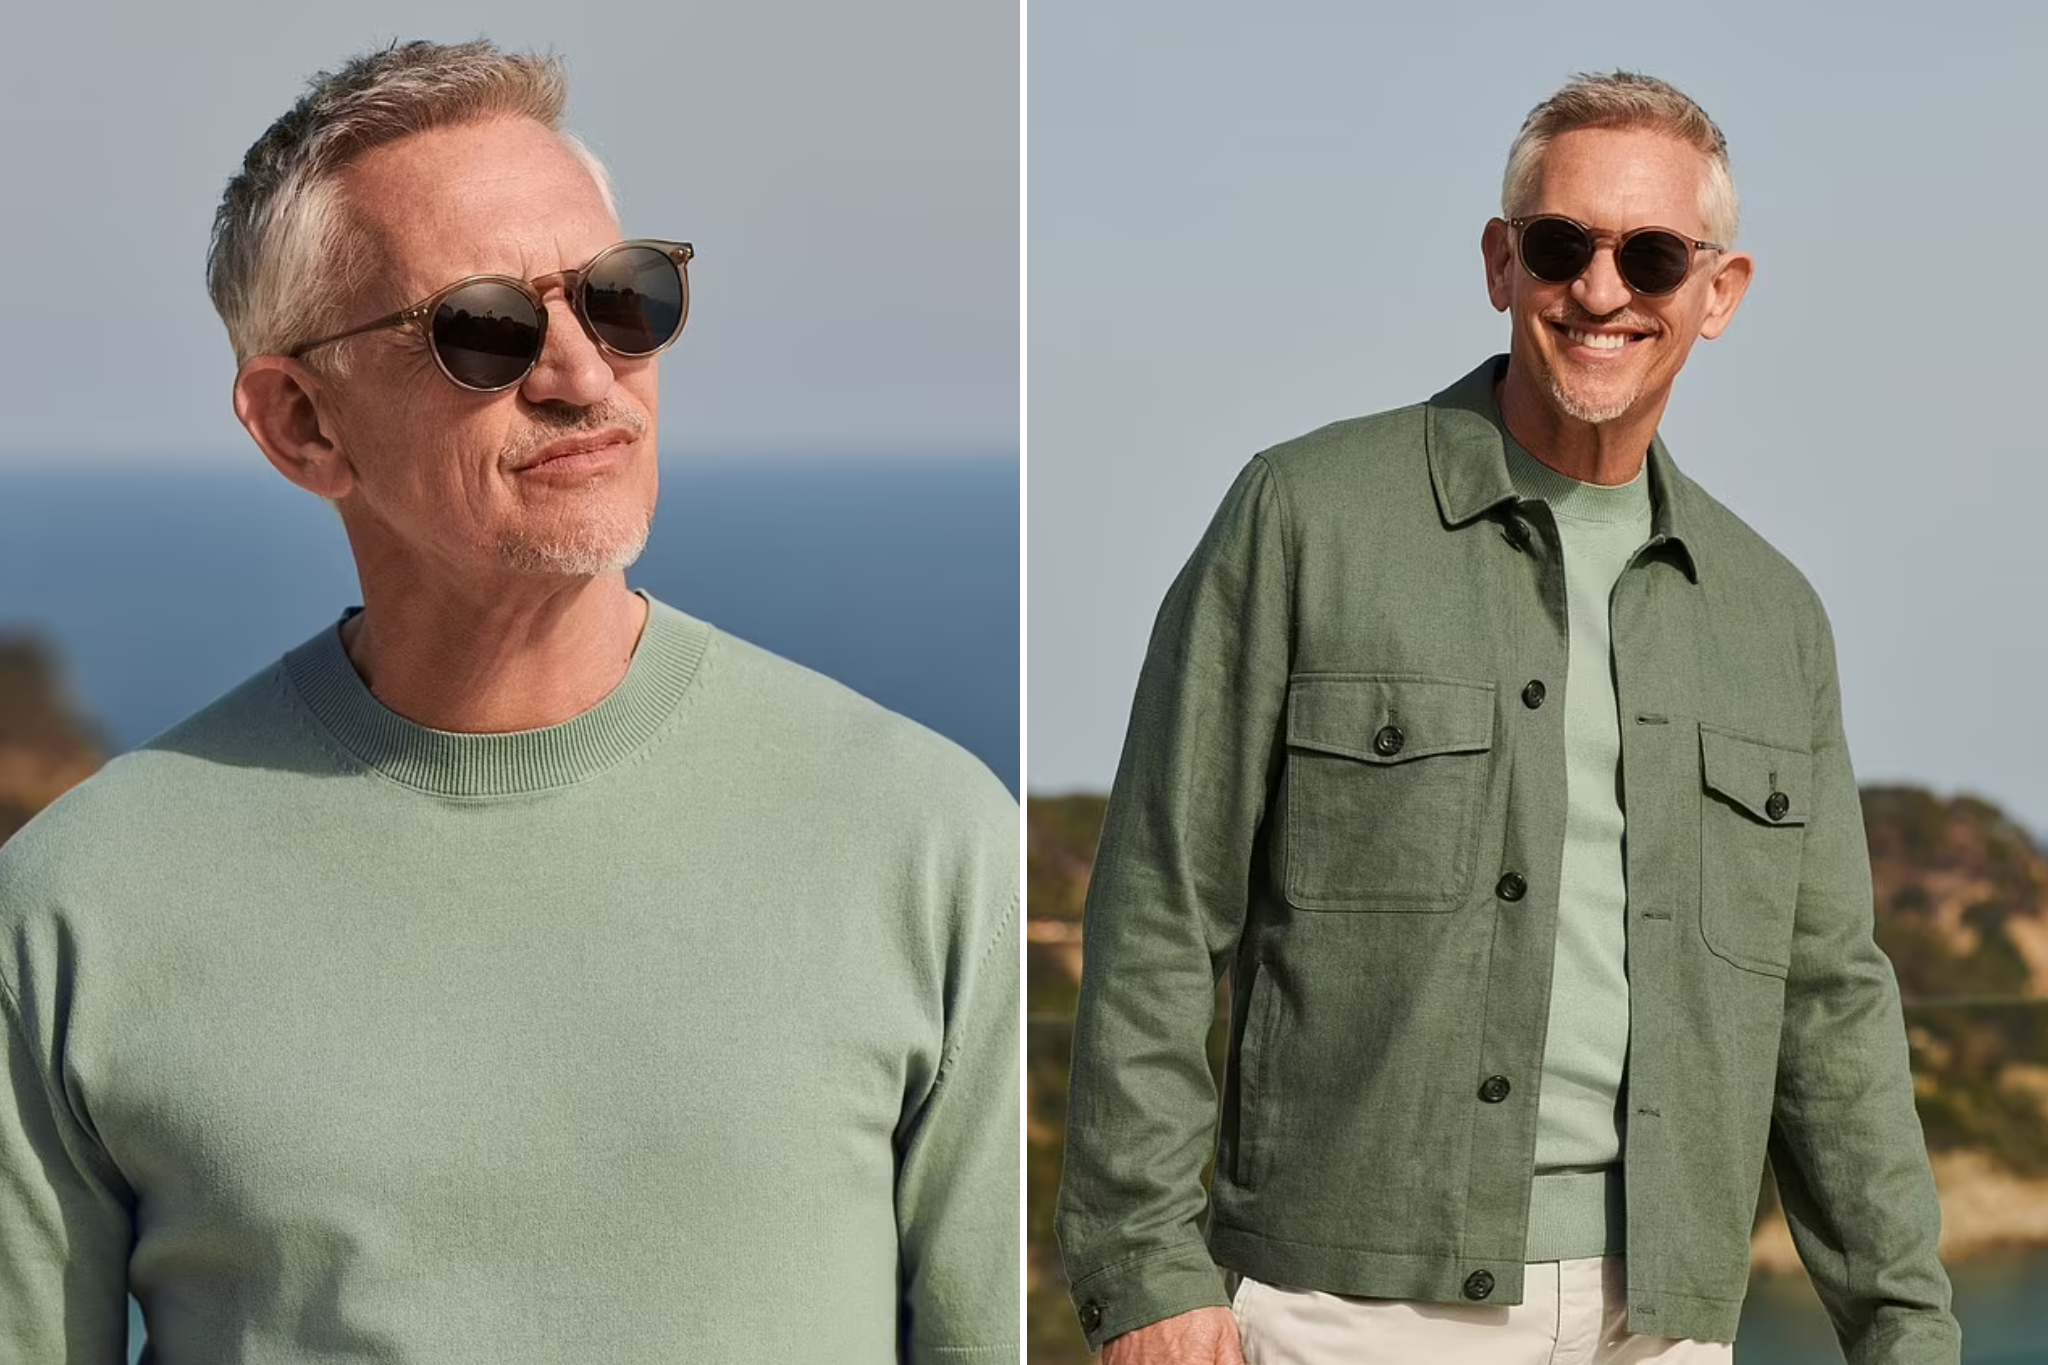 Lineker reportedly wore a green t-shirt and jacket he modeled for Next live during England's Euro 1 opener against Serbia.